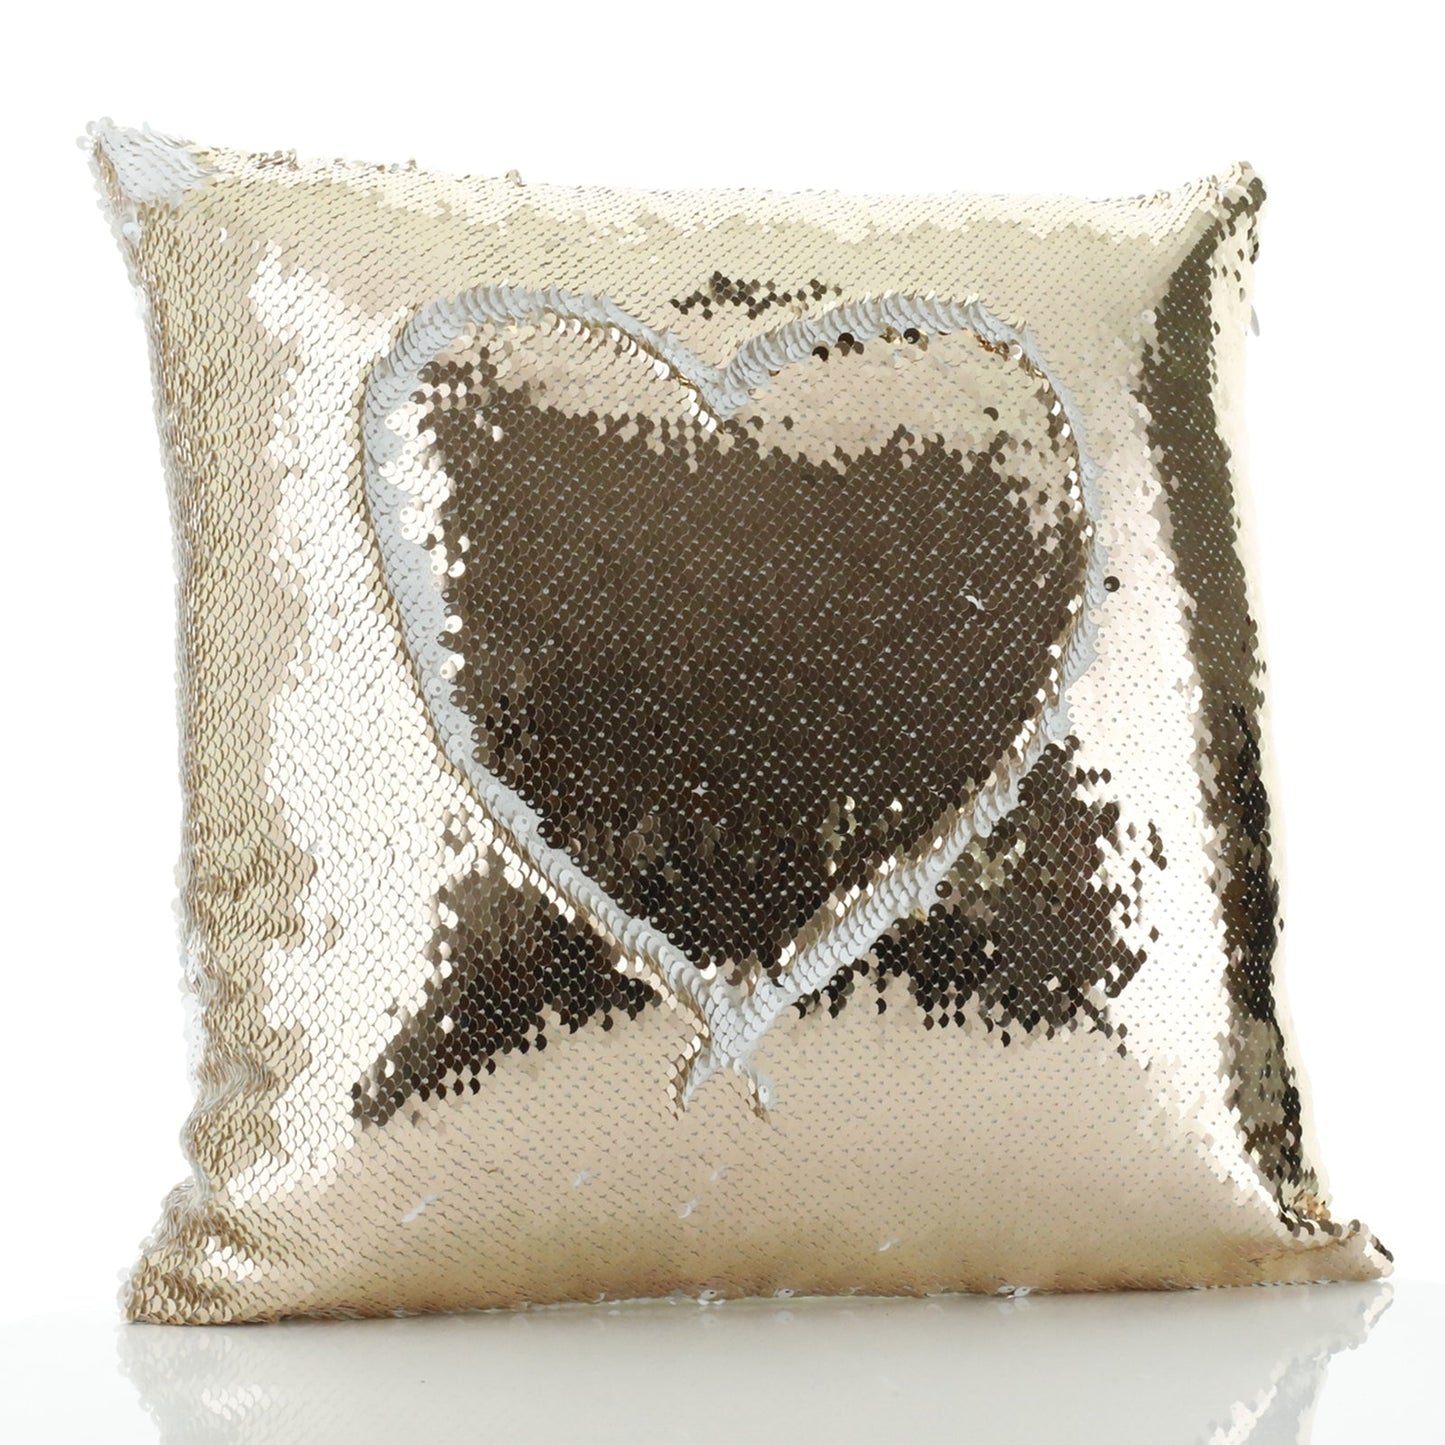 Personalised Sequin Cushion with Elephant Rain Drop Glitter Print and Cute Text